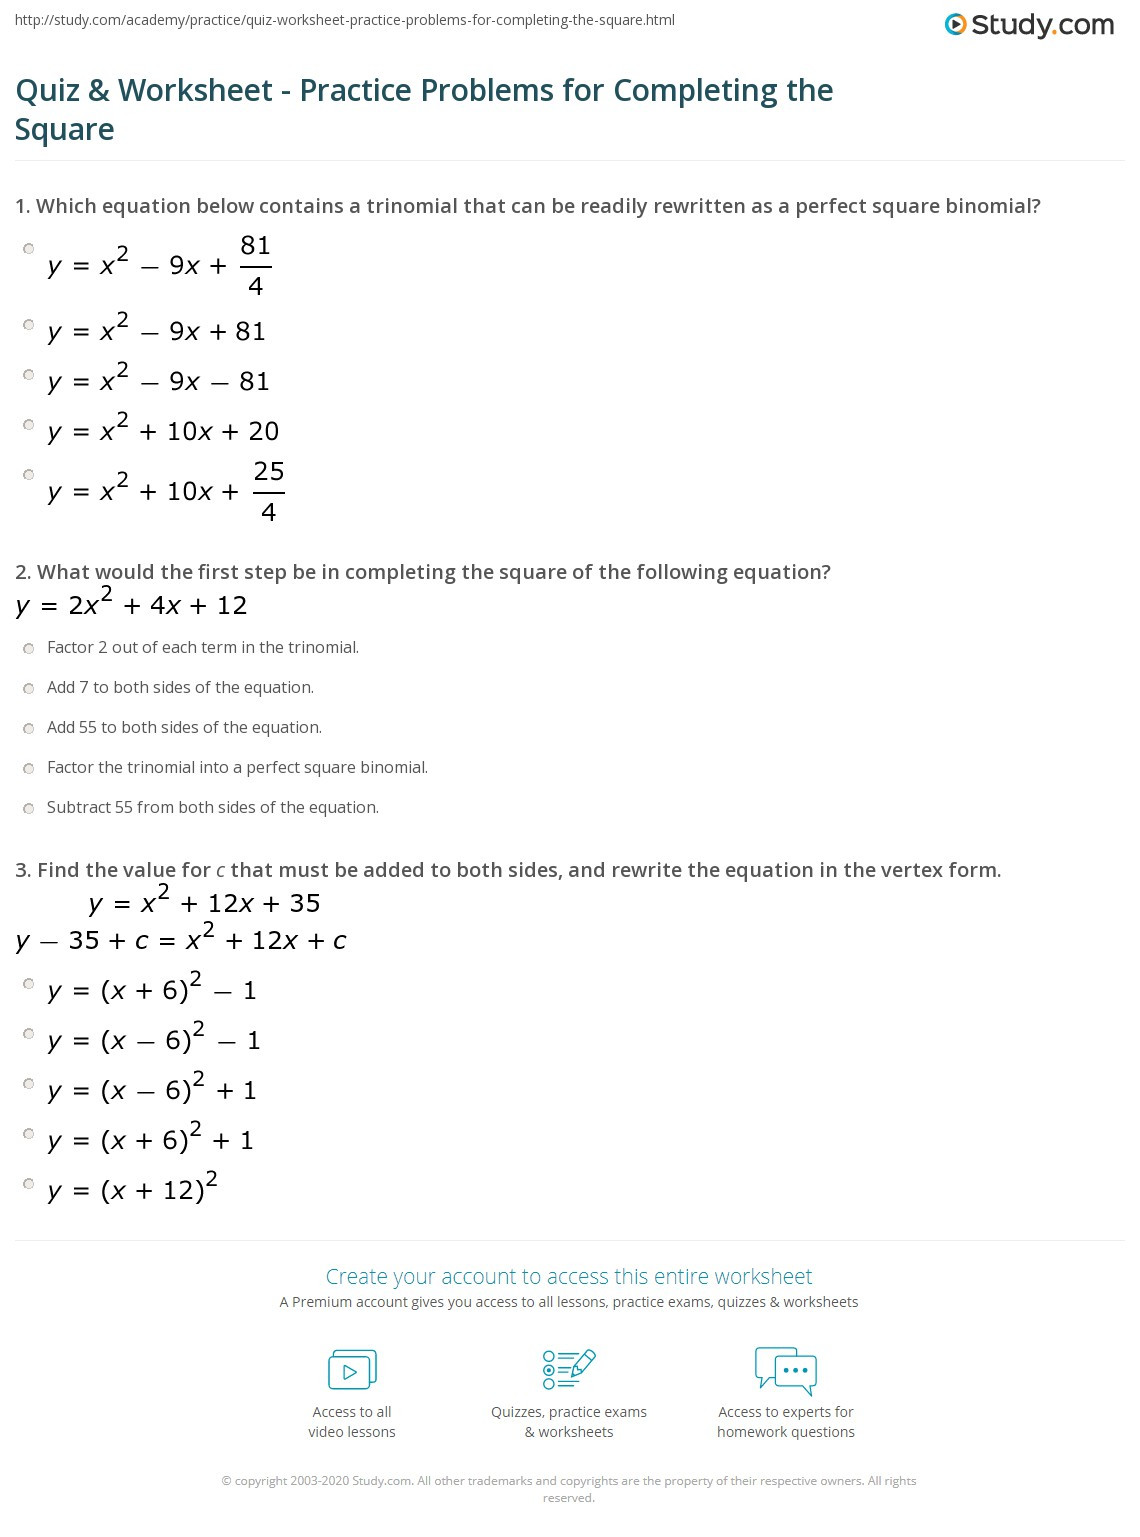 Complete the Square Worksheet Quiz &amp; Worksheet Practice Problems for Pleting the